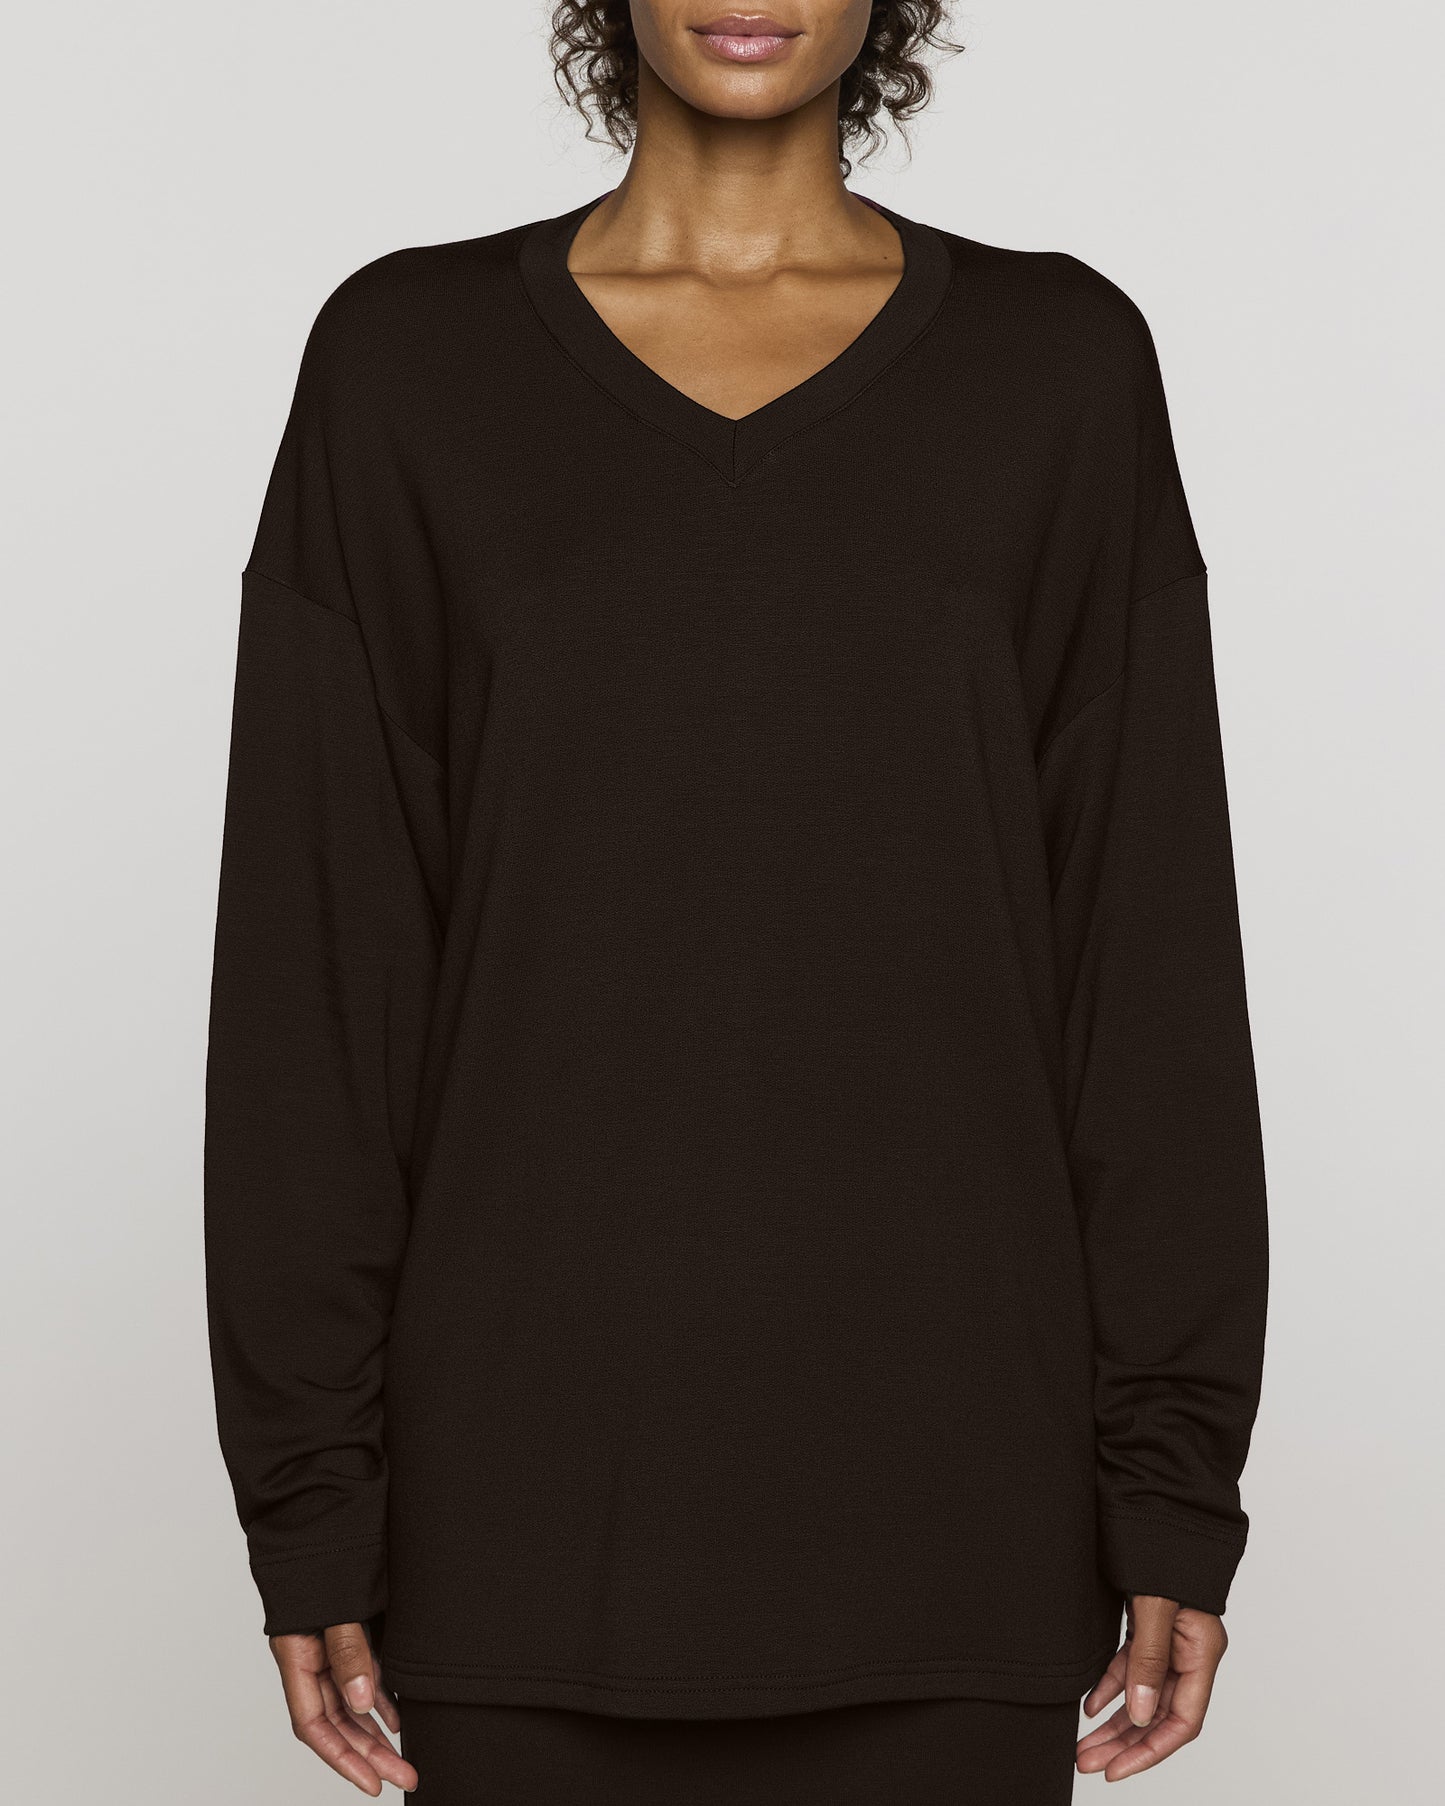 Coco | The Oversized V-Neck Front